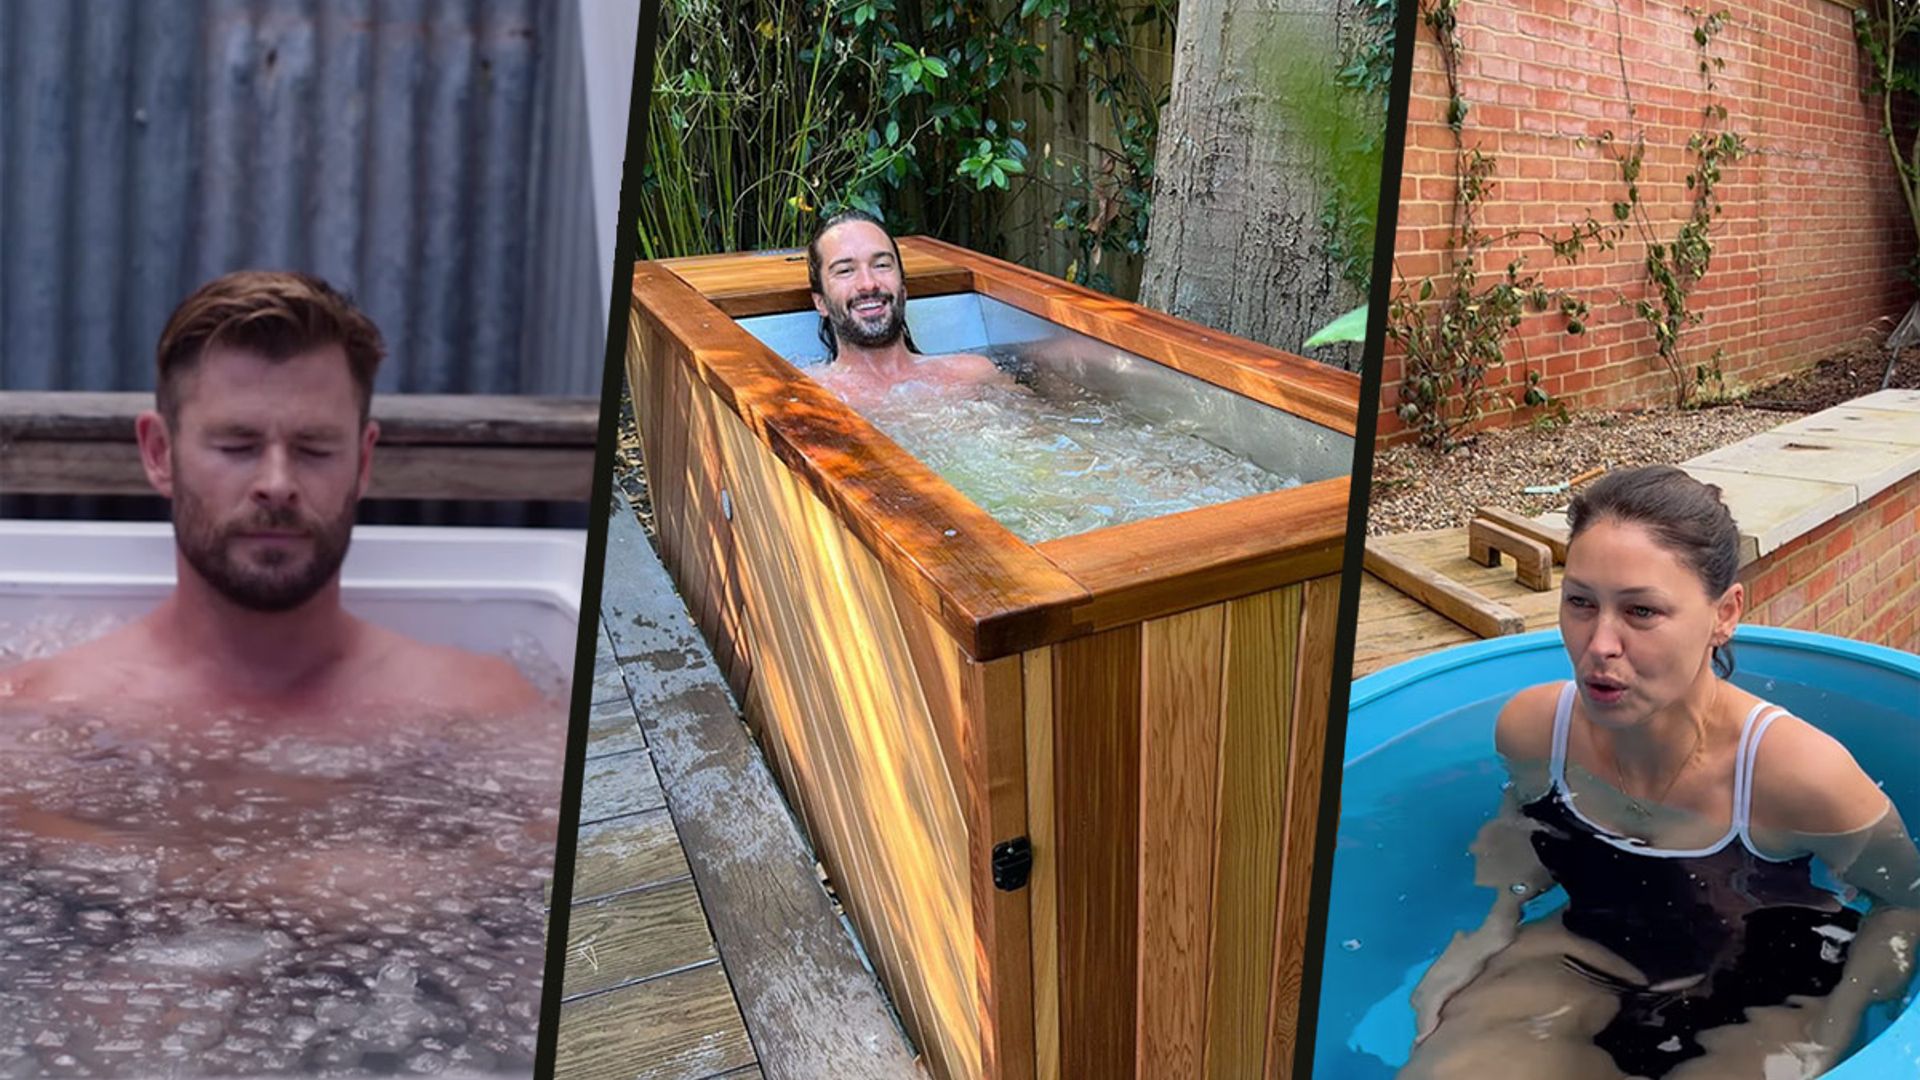 Hot Tubs, Saunas & Pools You'll Love in 2023